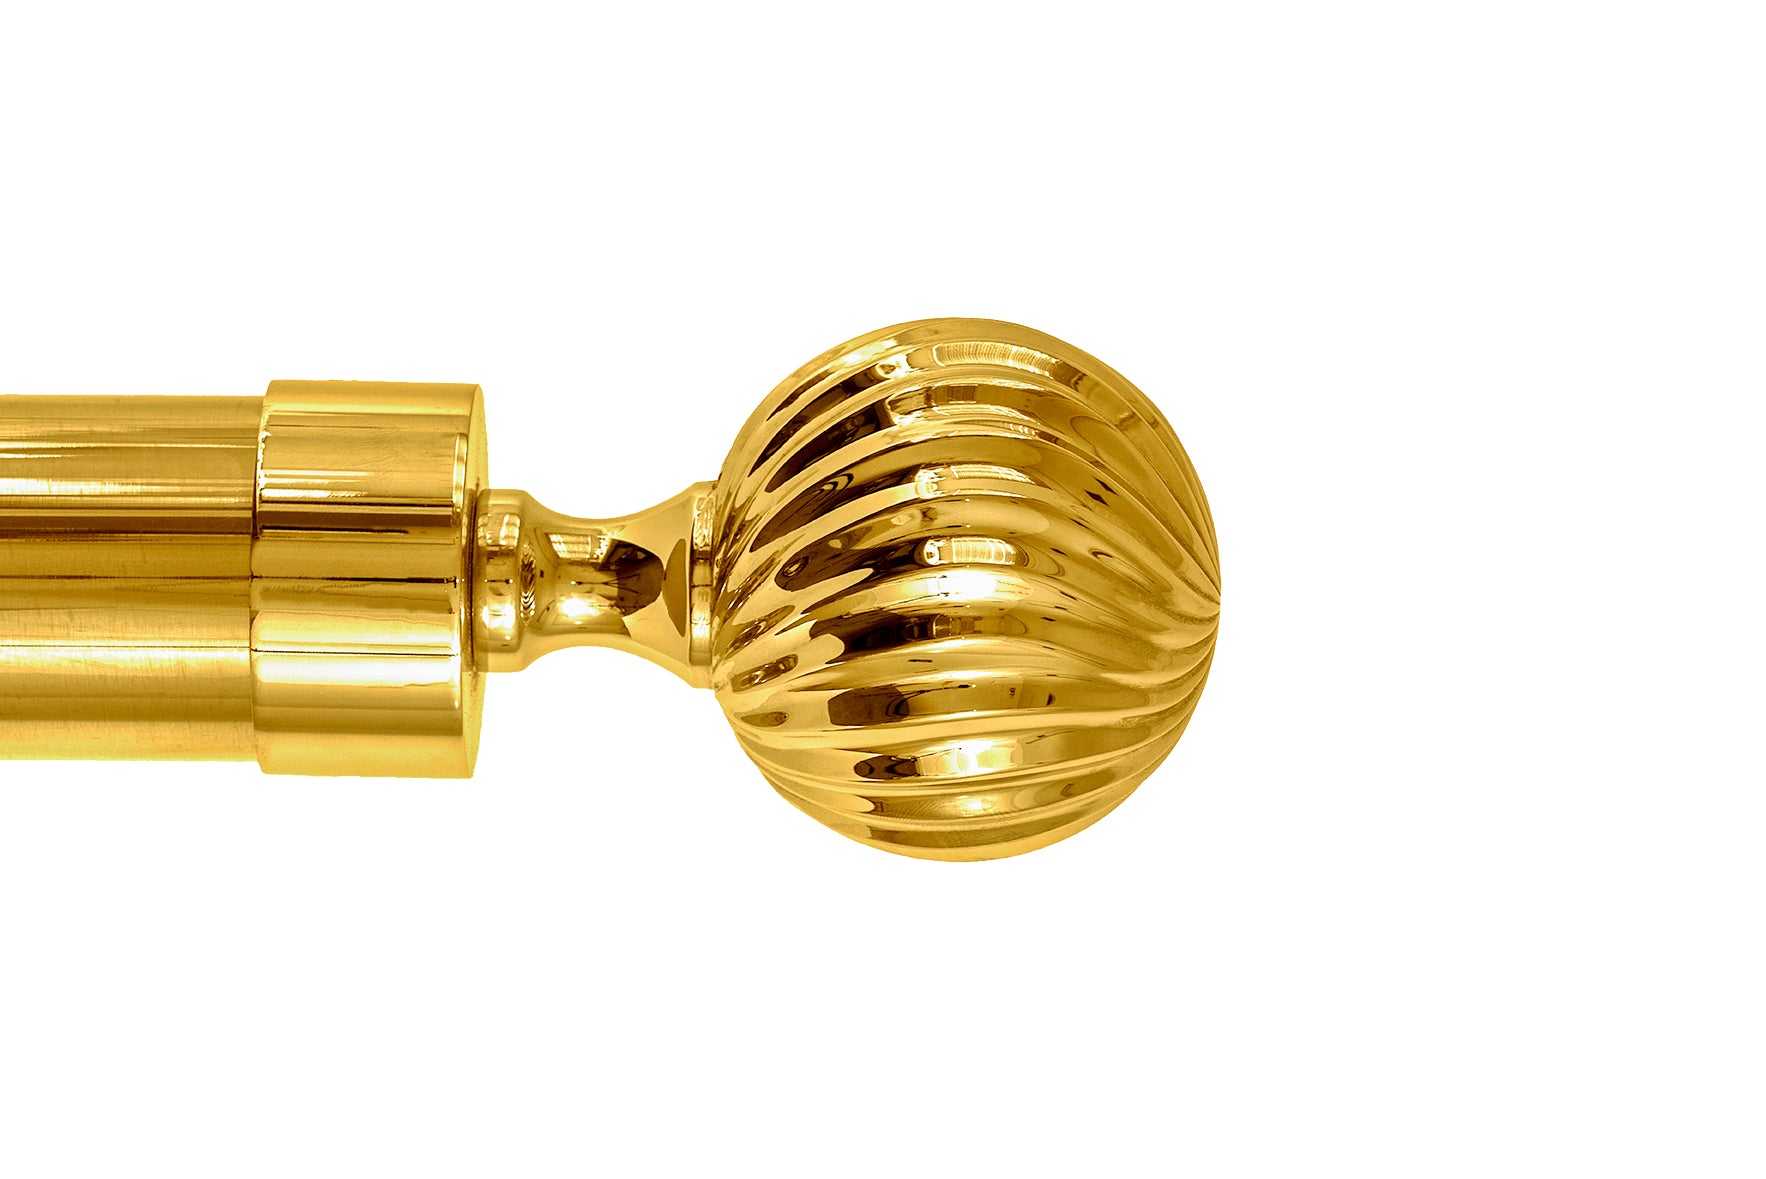 Tillys Twisted Ball Finial Curtain Pole Set in Polished Brass